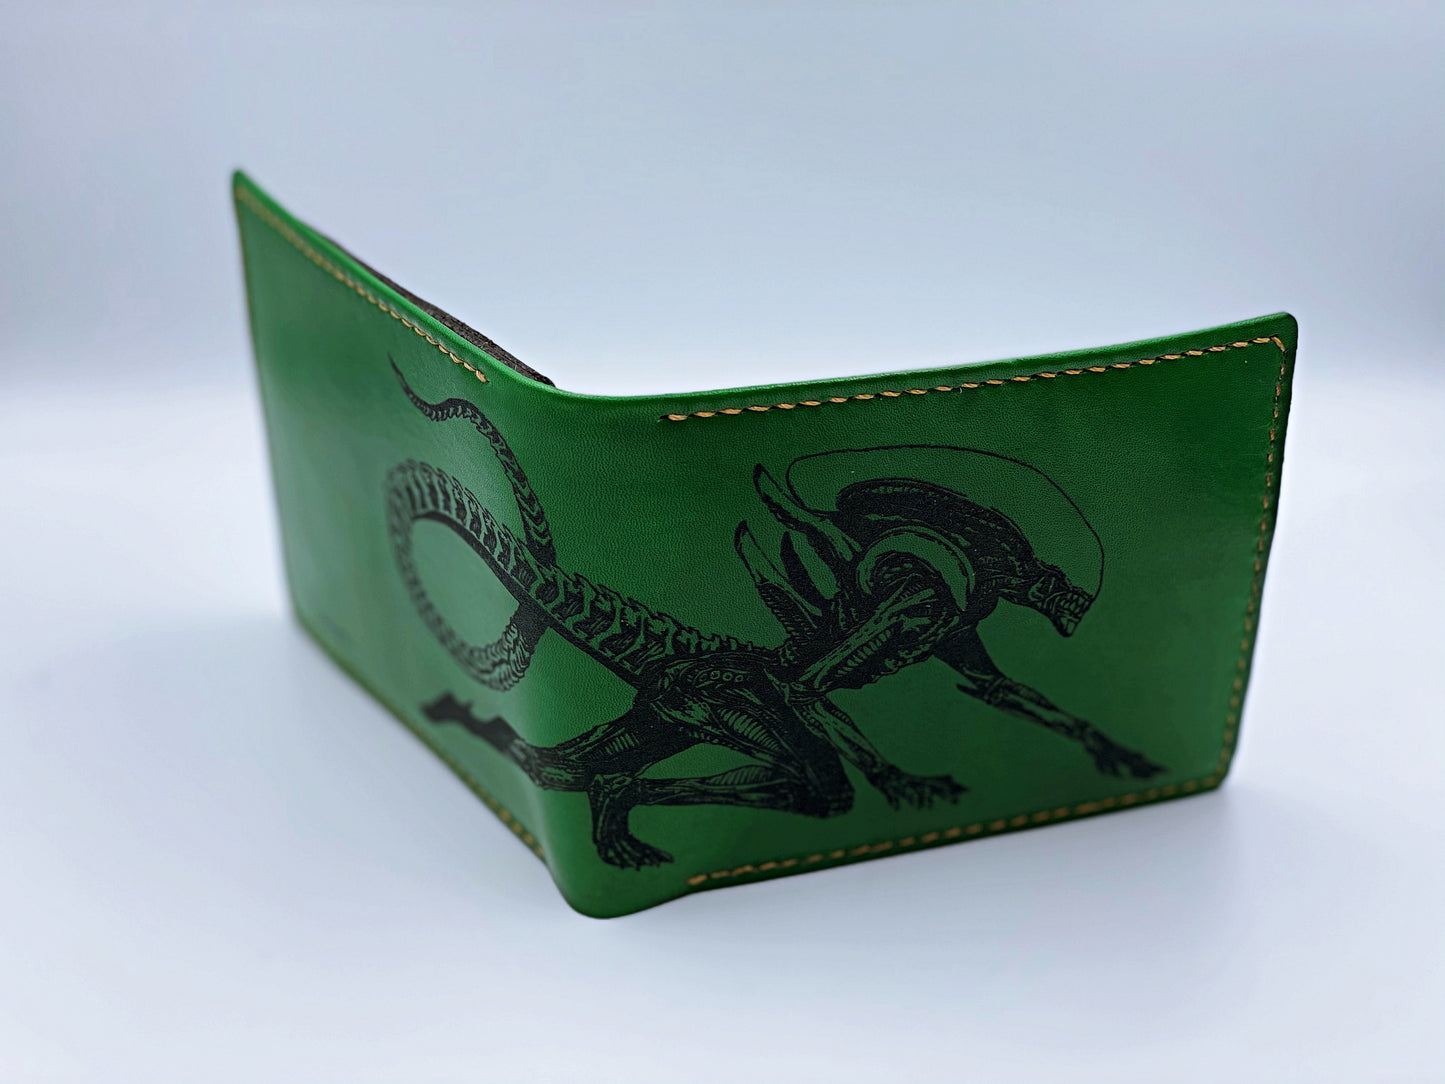 Mayan Corner - Aliens xenomorph monster leather handmade men's wallet, custom gifts for him, father's day gifts, anniversary gift for men